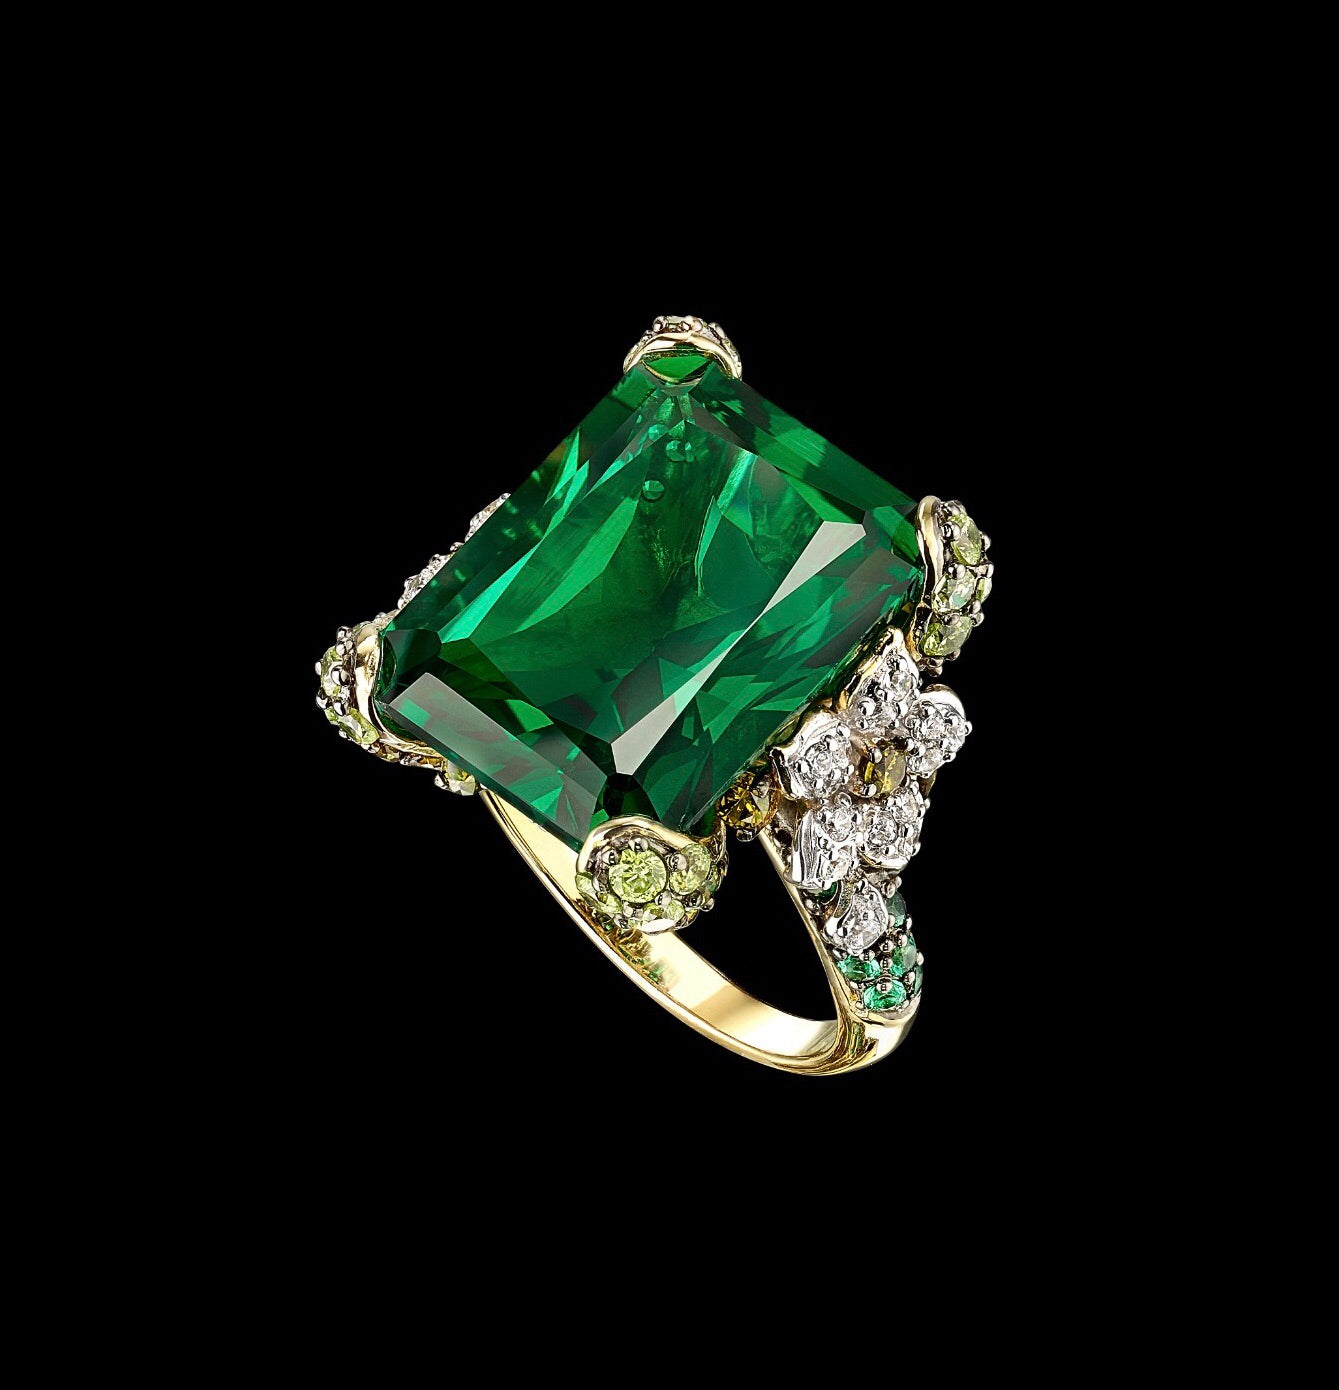 Emerald Cinderella Ring, Ring, Anabela Chan Joaillerie - Fine jewelry with laboratory grown and created gemstones hand-crafted in the United Kingdom. Anabela Chan Joaillerie is the first fine jewellery brand in the world to champion laboratory-grown and created gemstones with high jewellery design, artisanal craftsmanship and a focus on ethical and sustainable innovations.